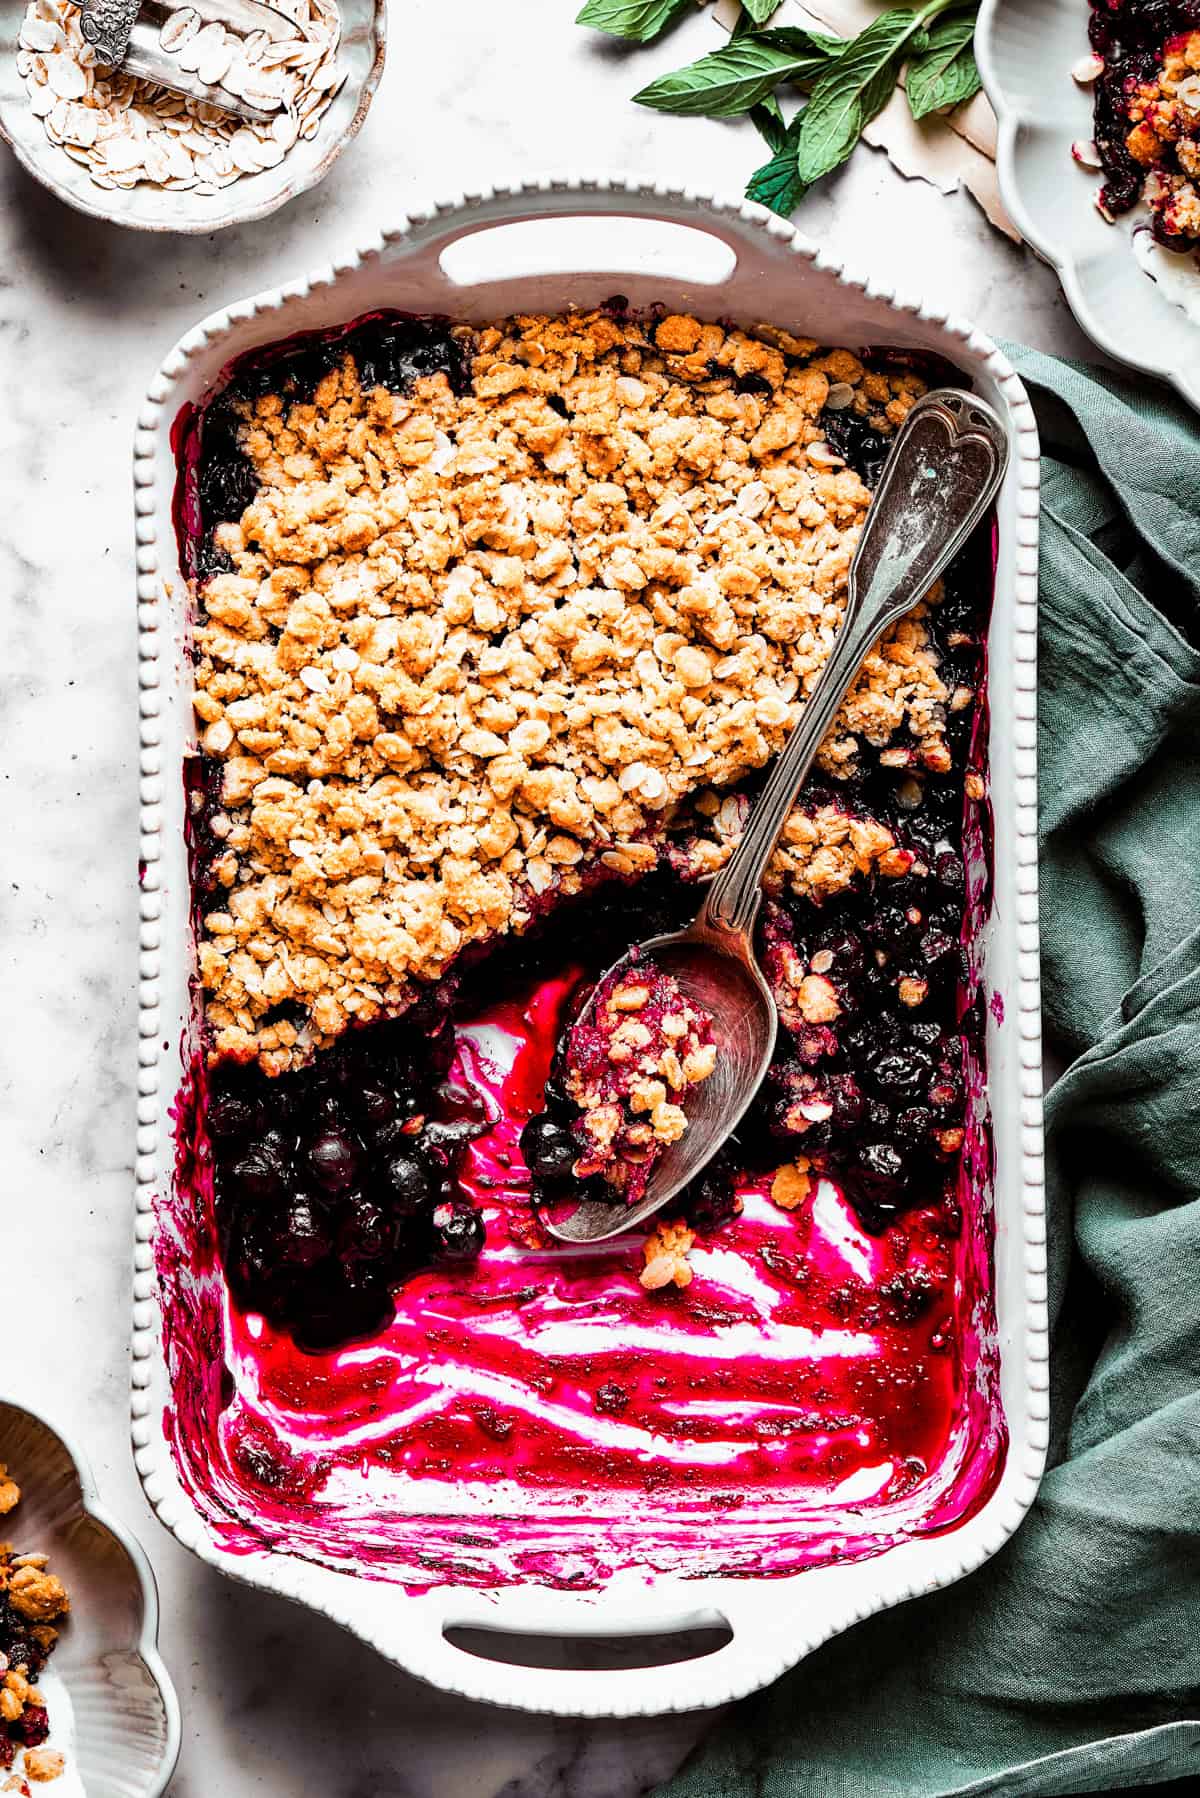 Overhead image of a blueberry crisp in a baking dish, with half of the crisp scooped out.